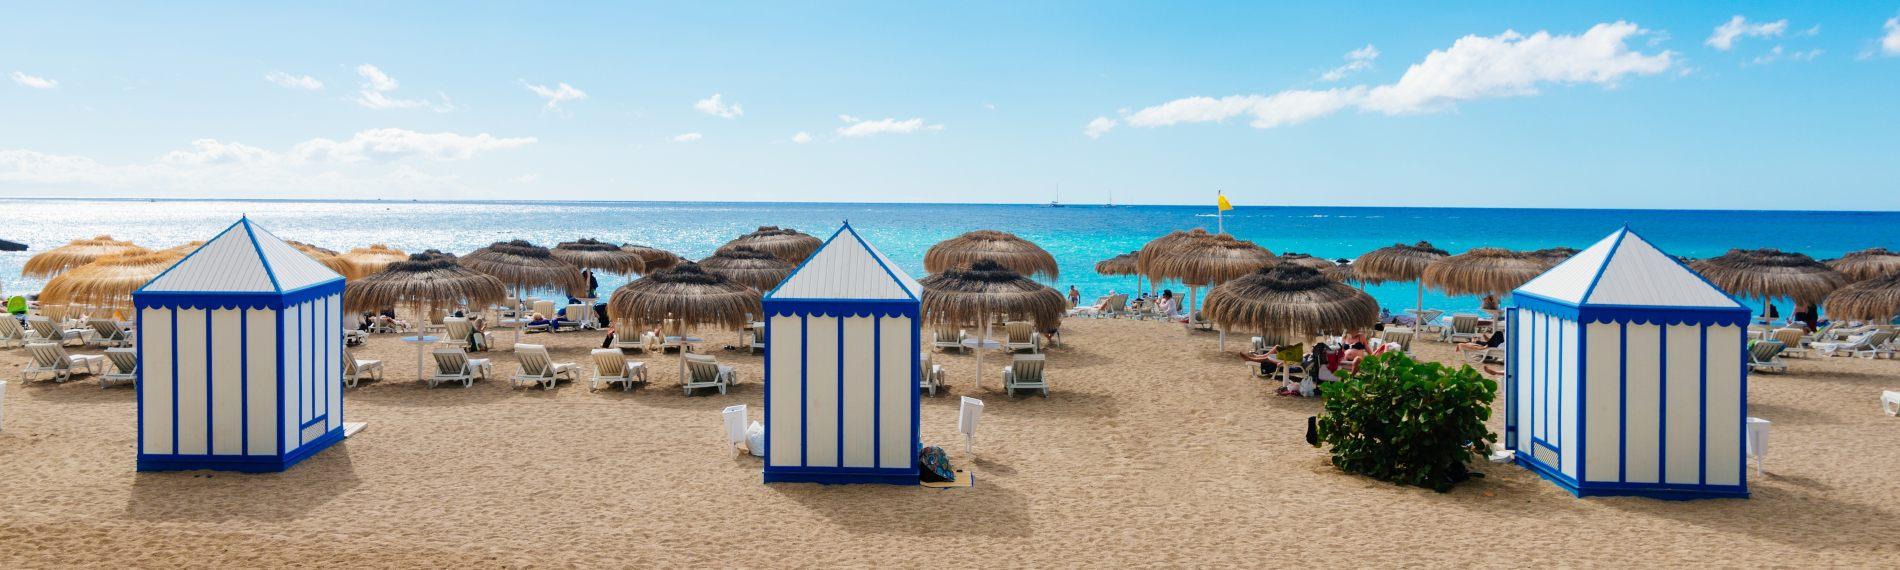 Looking out to the blue sea, past stripey huts and thatched parasols, on the sandy beach of Playa del Duque in Tenerife